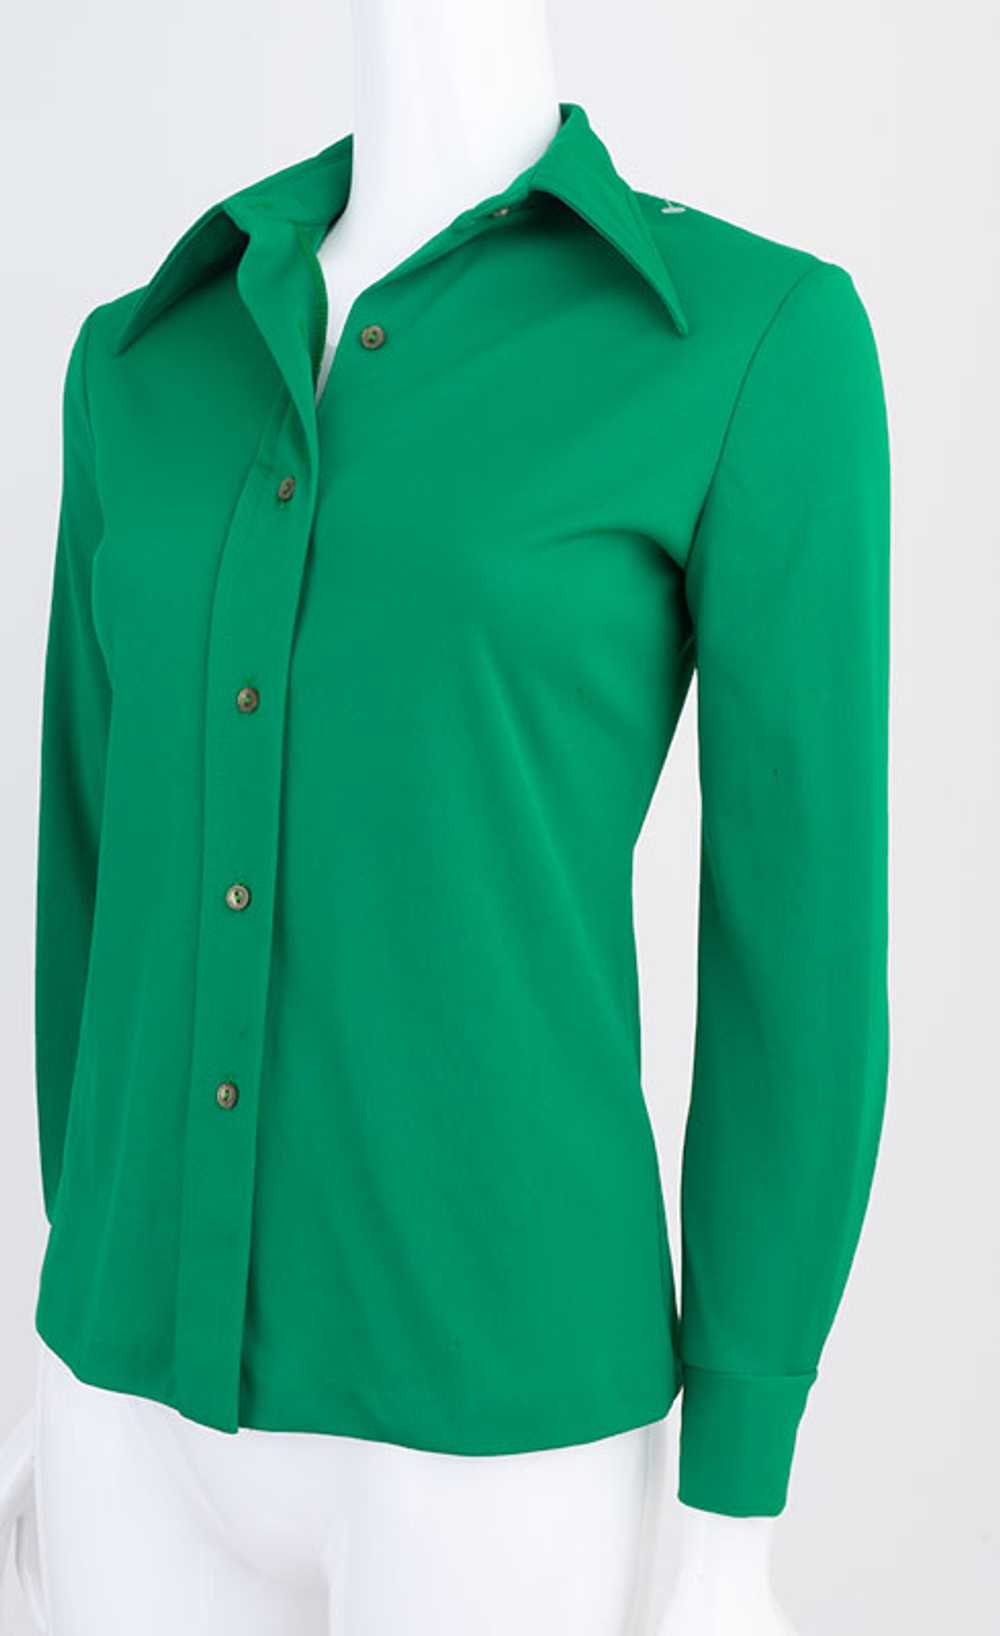 Kelly Green 1970s Blouse - image 2